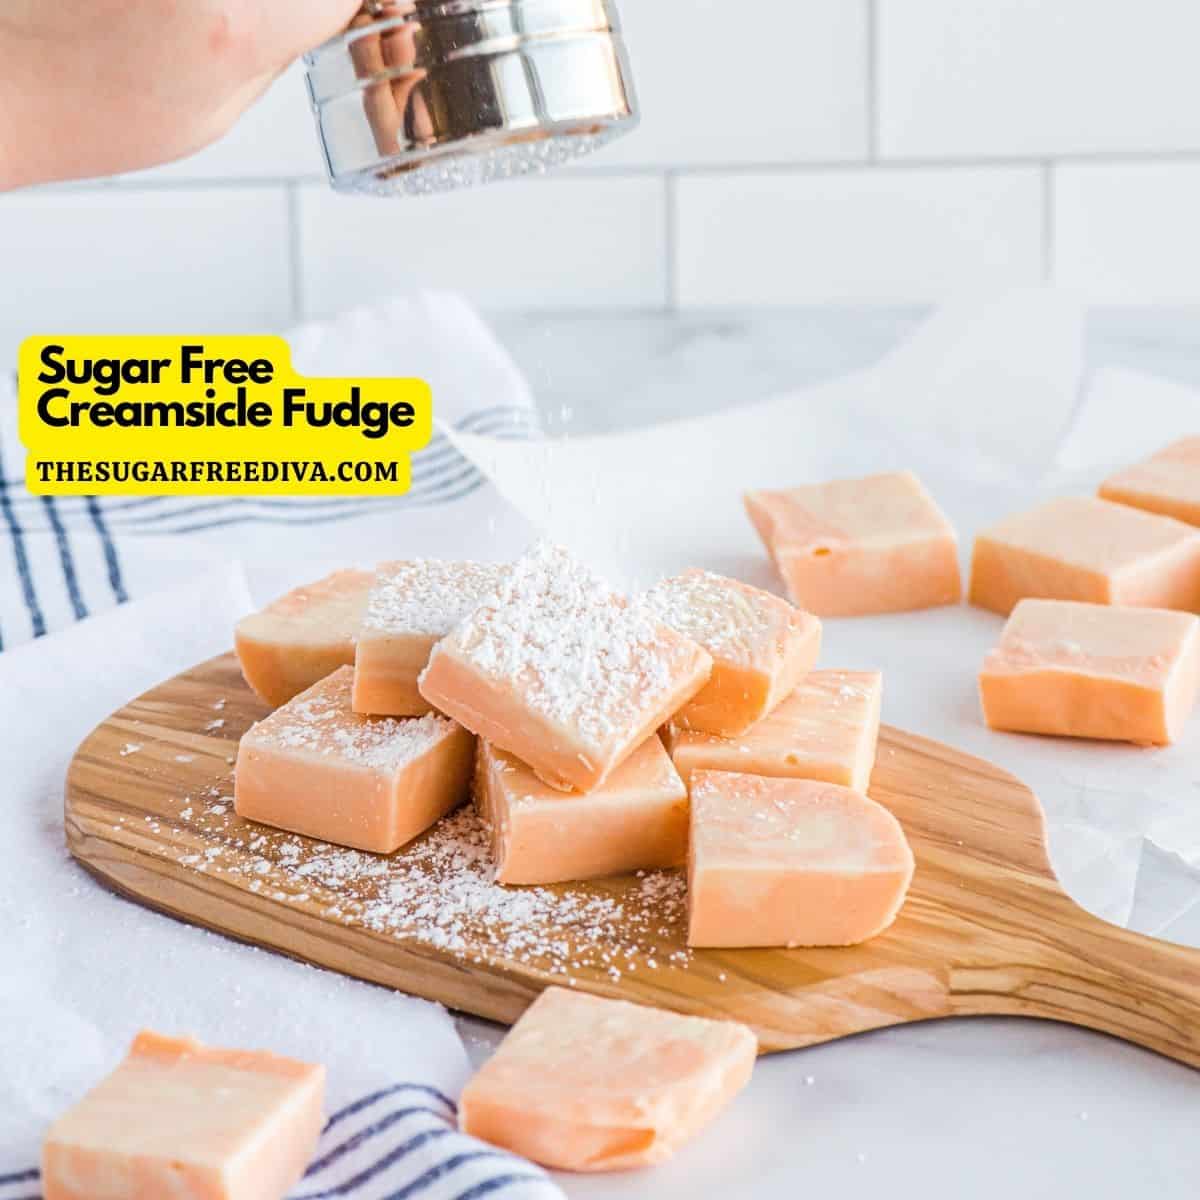 Sugar Free Creamsicle Fudge, a simple four ingredient recipe for creamy and delicious orange fudge made with no added sugar.